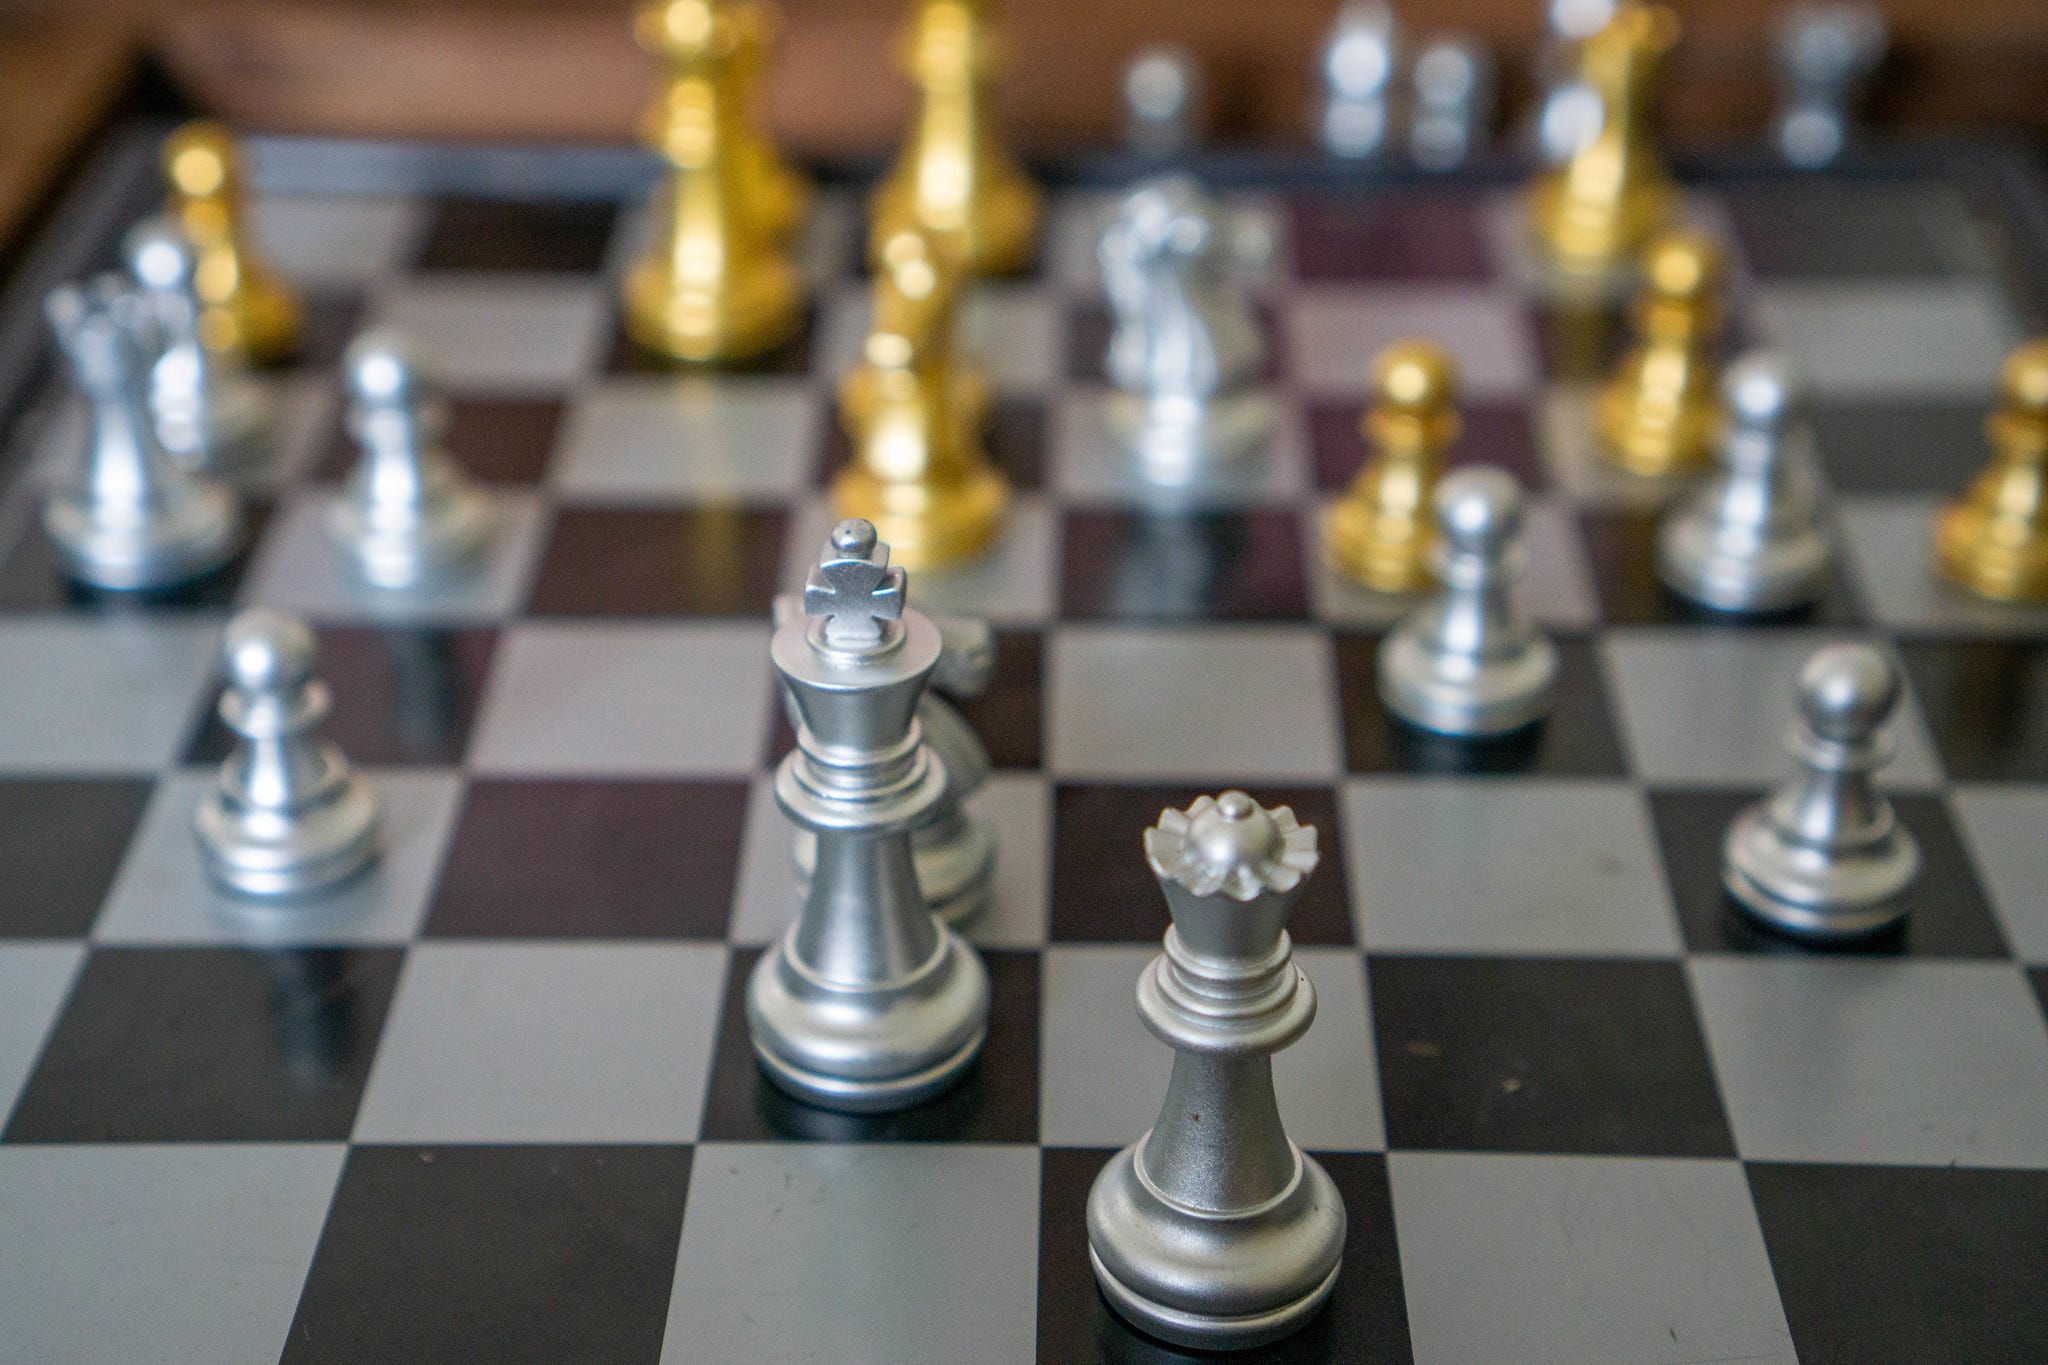 Aligning superhuman AI with human behaviour: chess as a model system